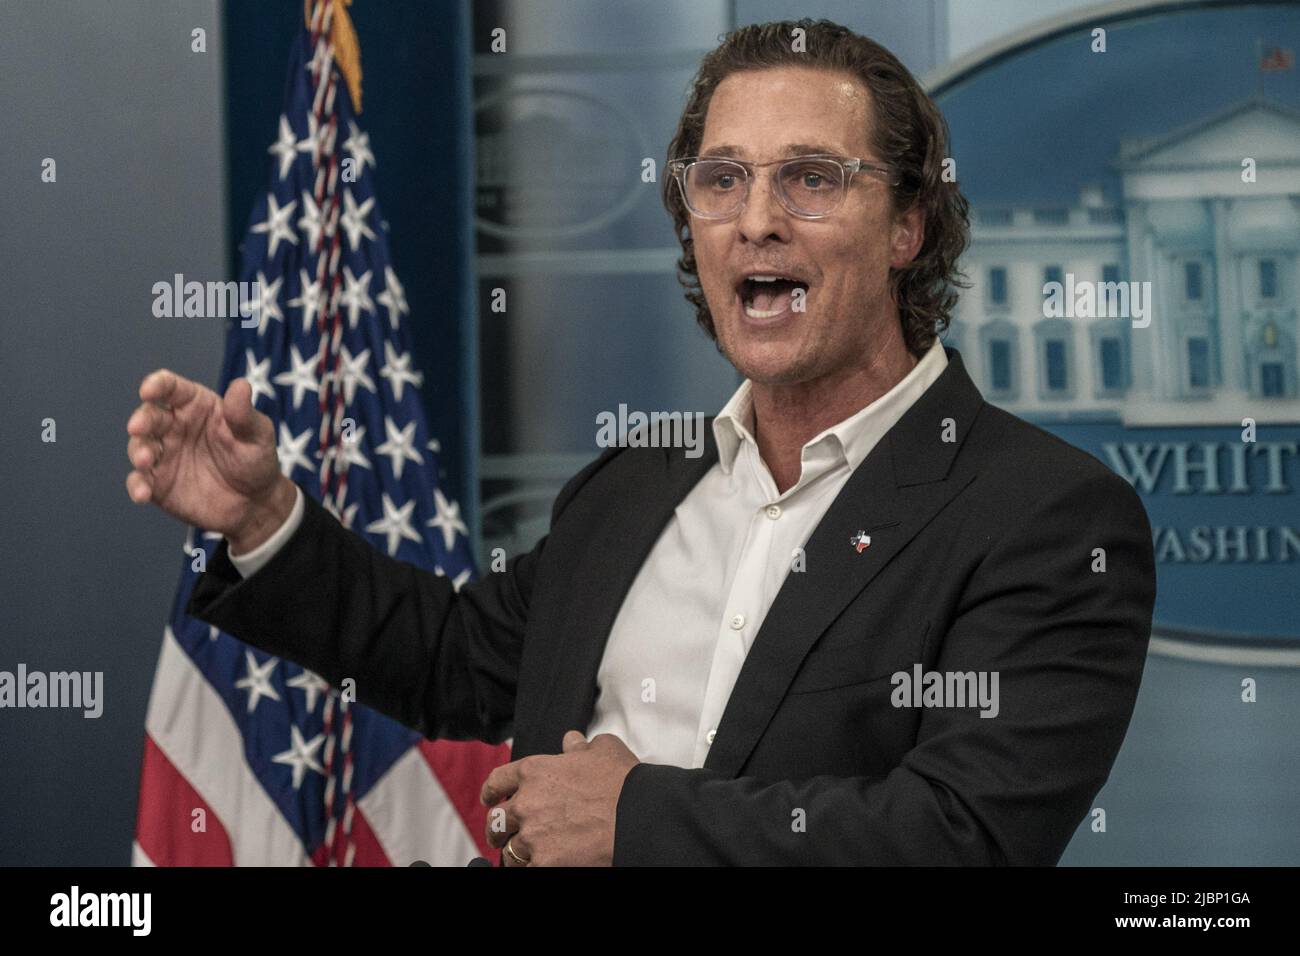 Washington, United States. 07th June, 2022. Matthew McConaughey, a native of Uvalde, Texas, speaks during a press conference on gun violence in the James S. Brady Press Briefing Room at the White House in Washington, DC on Tuesday, June 7, 2022. Photo by Ken Cedeno/UPI Credit: UPI/Alamy Live News Stock Photo